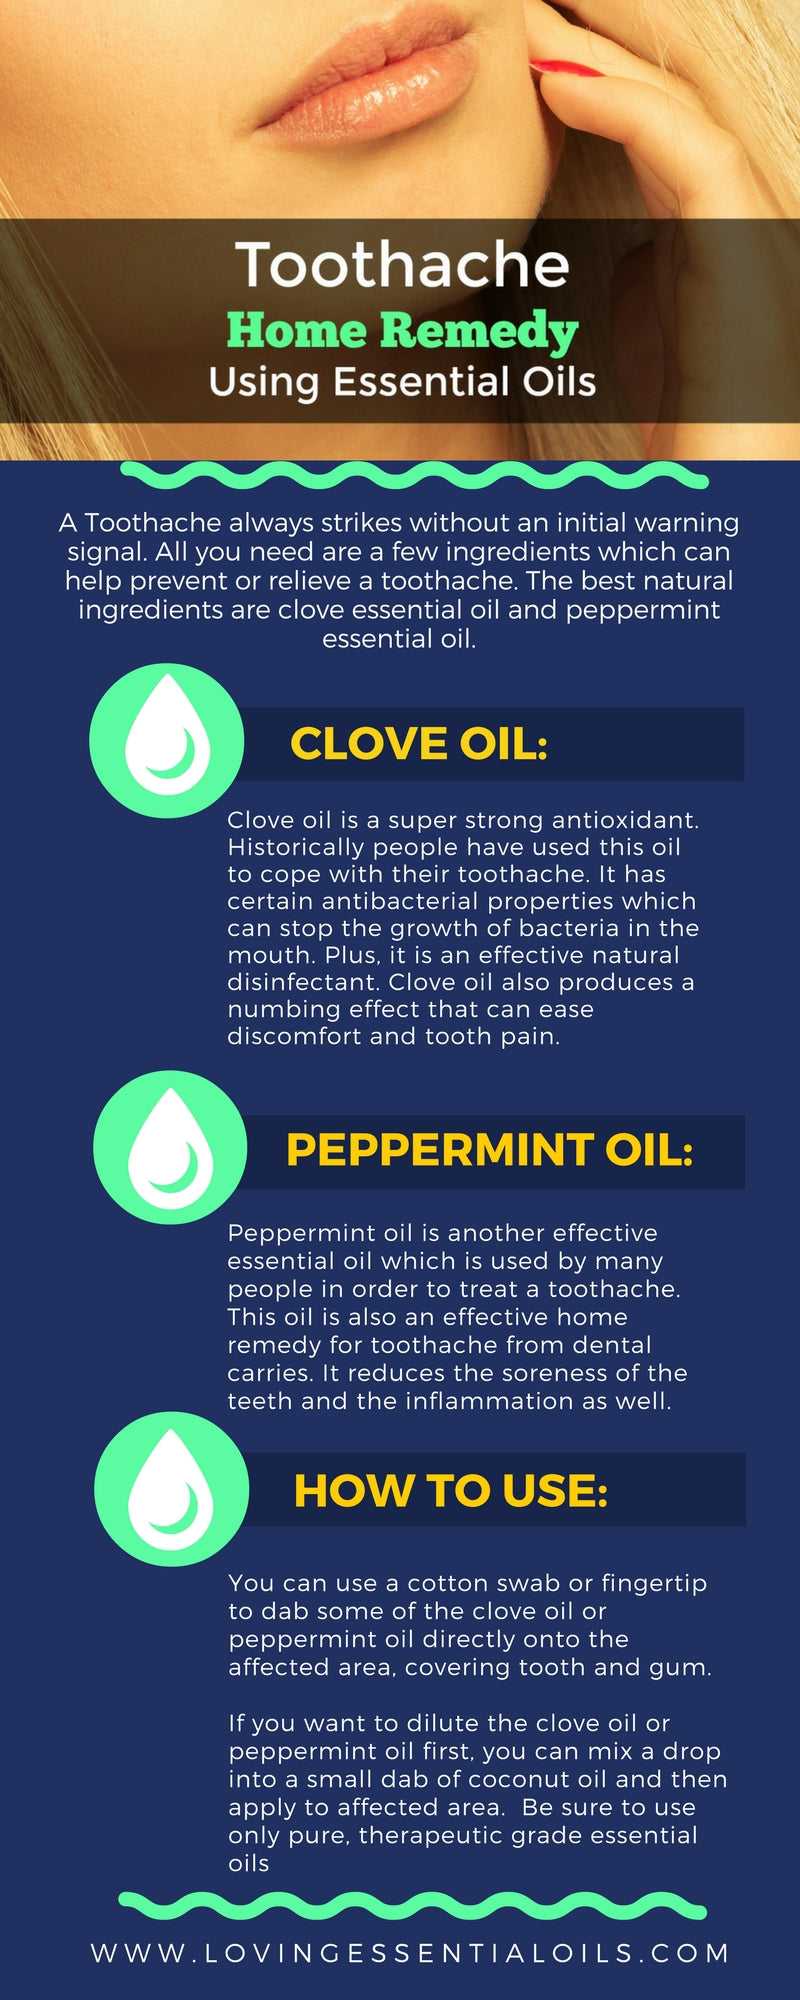 Toothache Home Remedy Using Essential Oils Infographic by Loving Essential Oils